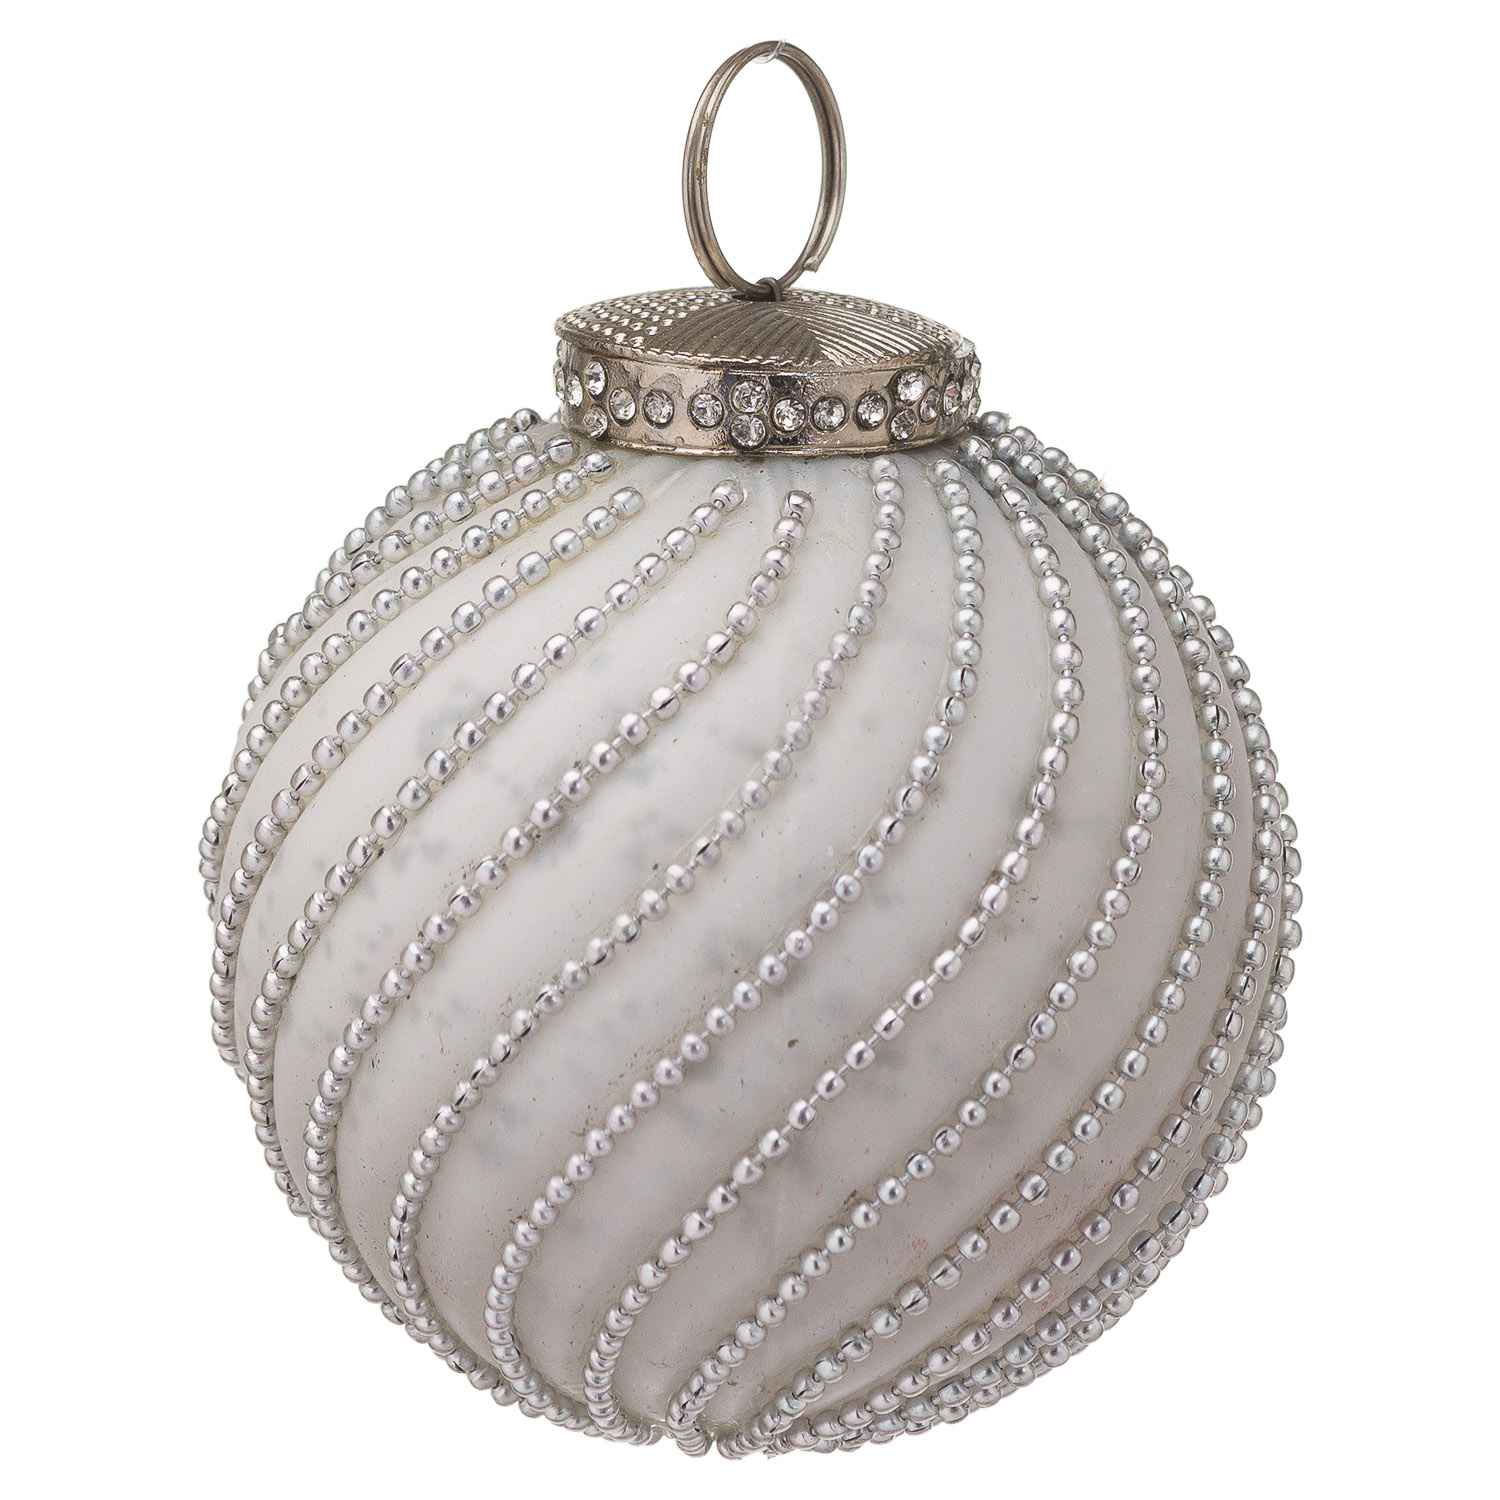 The Noel Collection White Jewel Swirl Large Bauble - Image 1